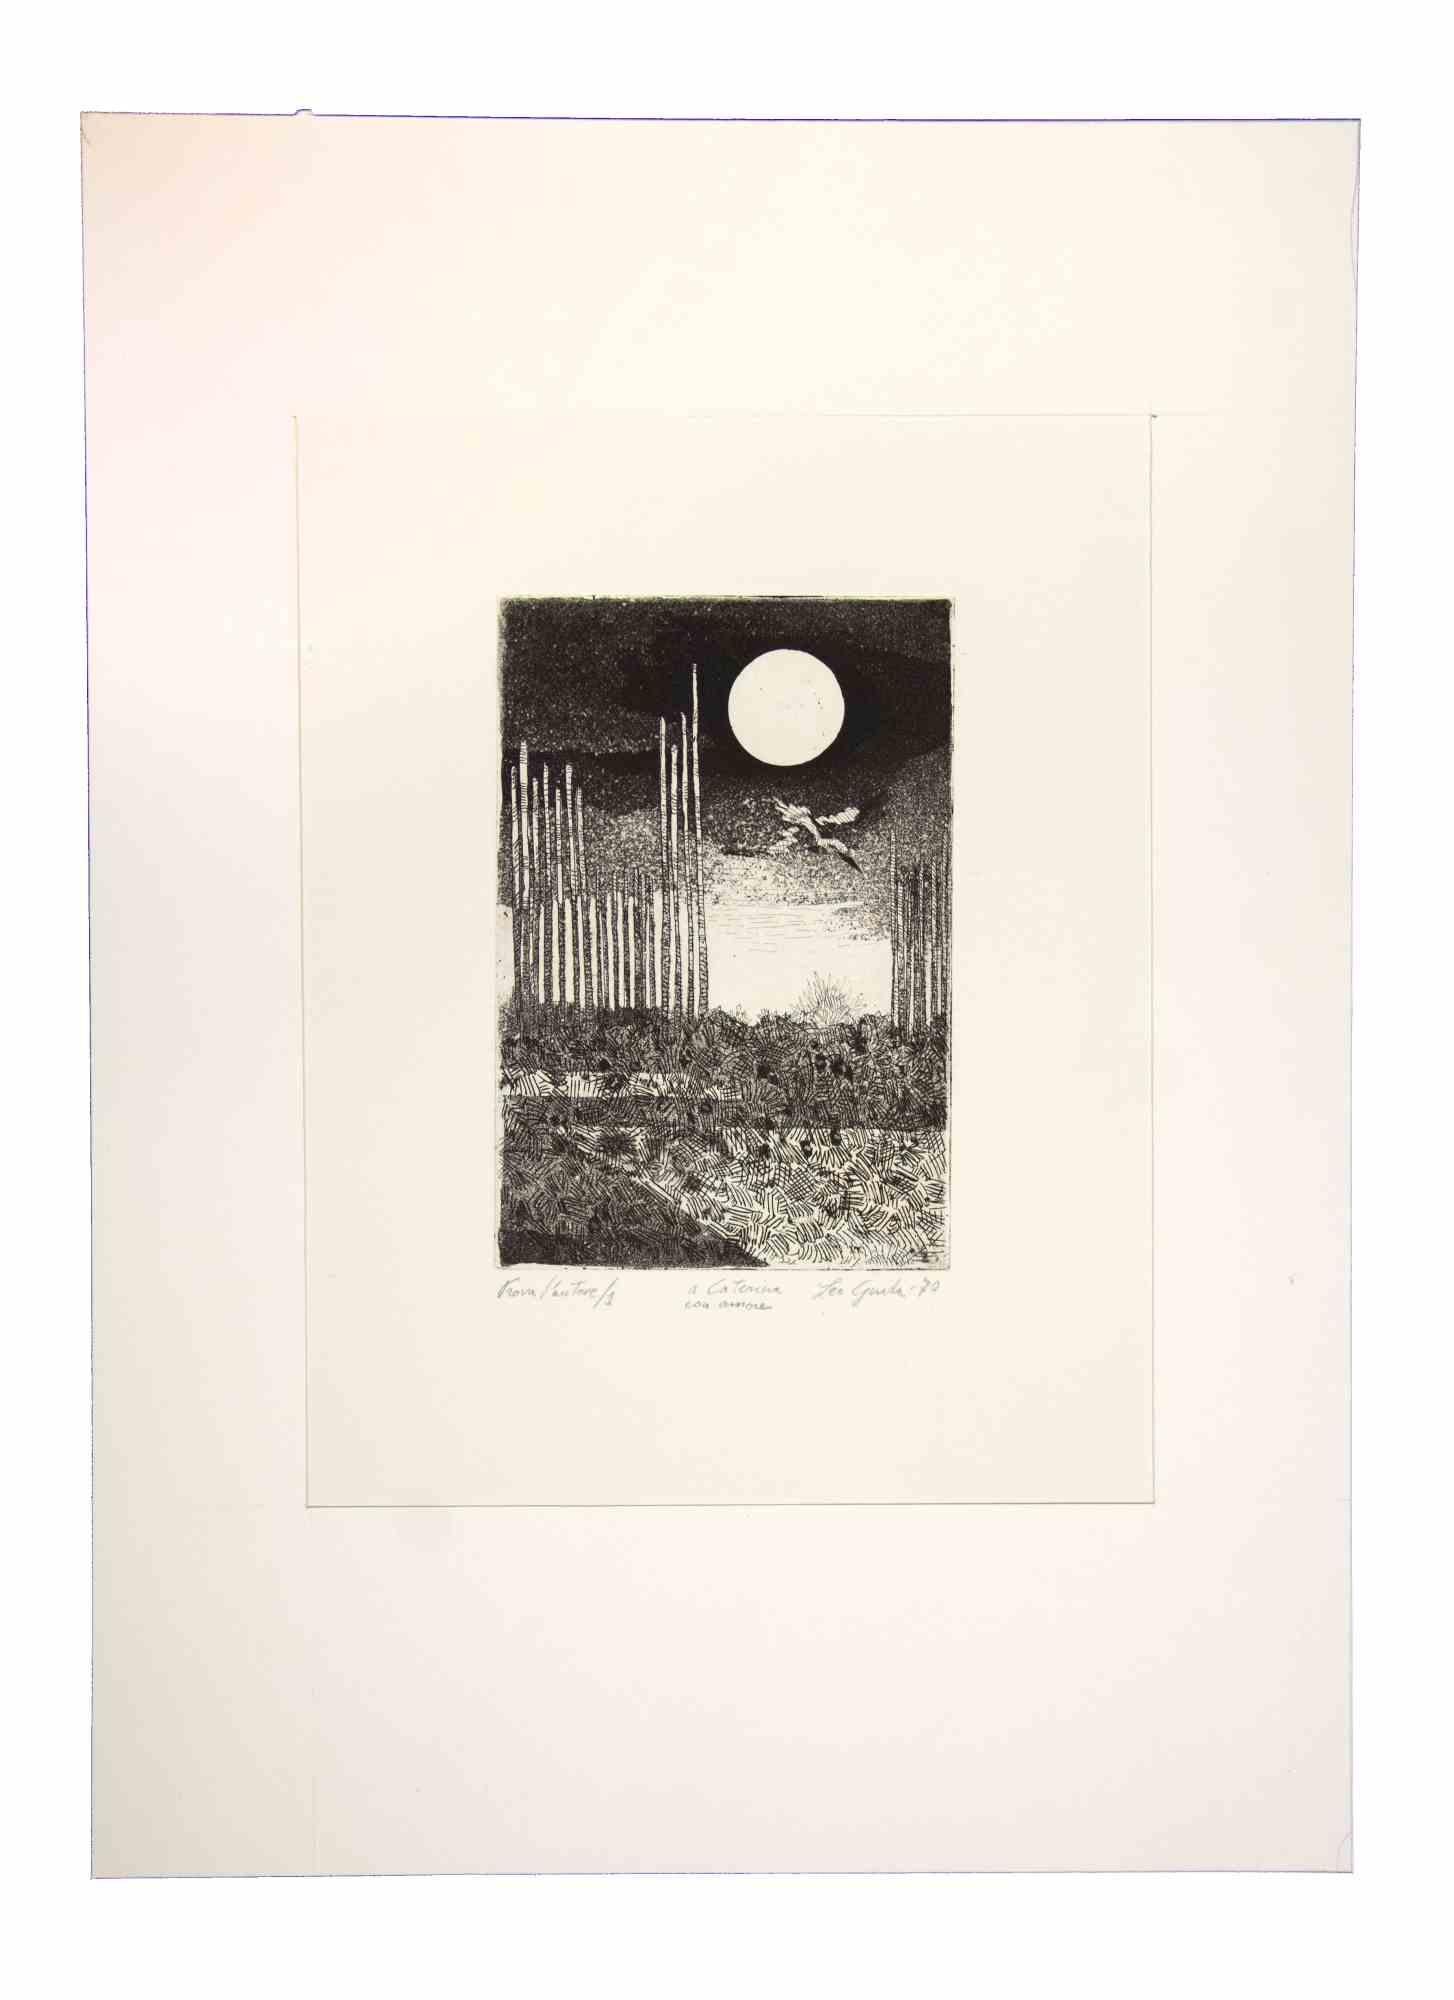 Night Landscape is an original artwork realized  in 1970 by the Italian Contemporary artist  Leo Guida  (1992 - 2017).

Etching and aquatint on ivory-colored paper, with a cardboard (39 x 28,5 cm)
 
Hand-signed and dated on the lower margin.

In